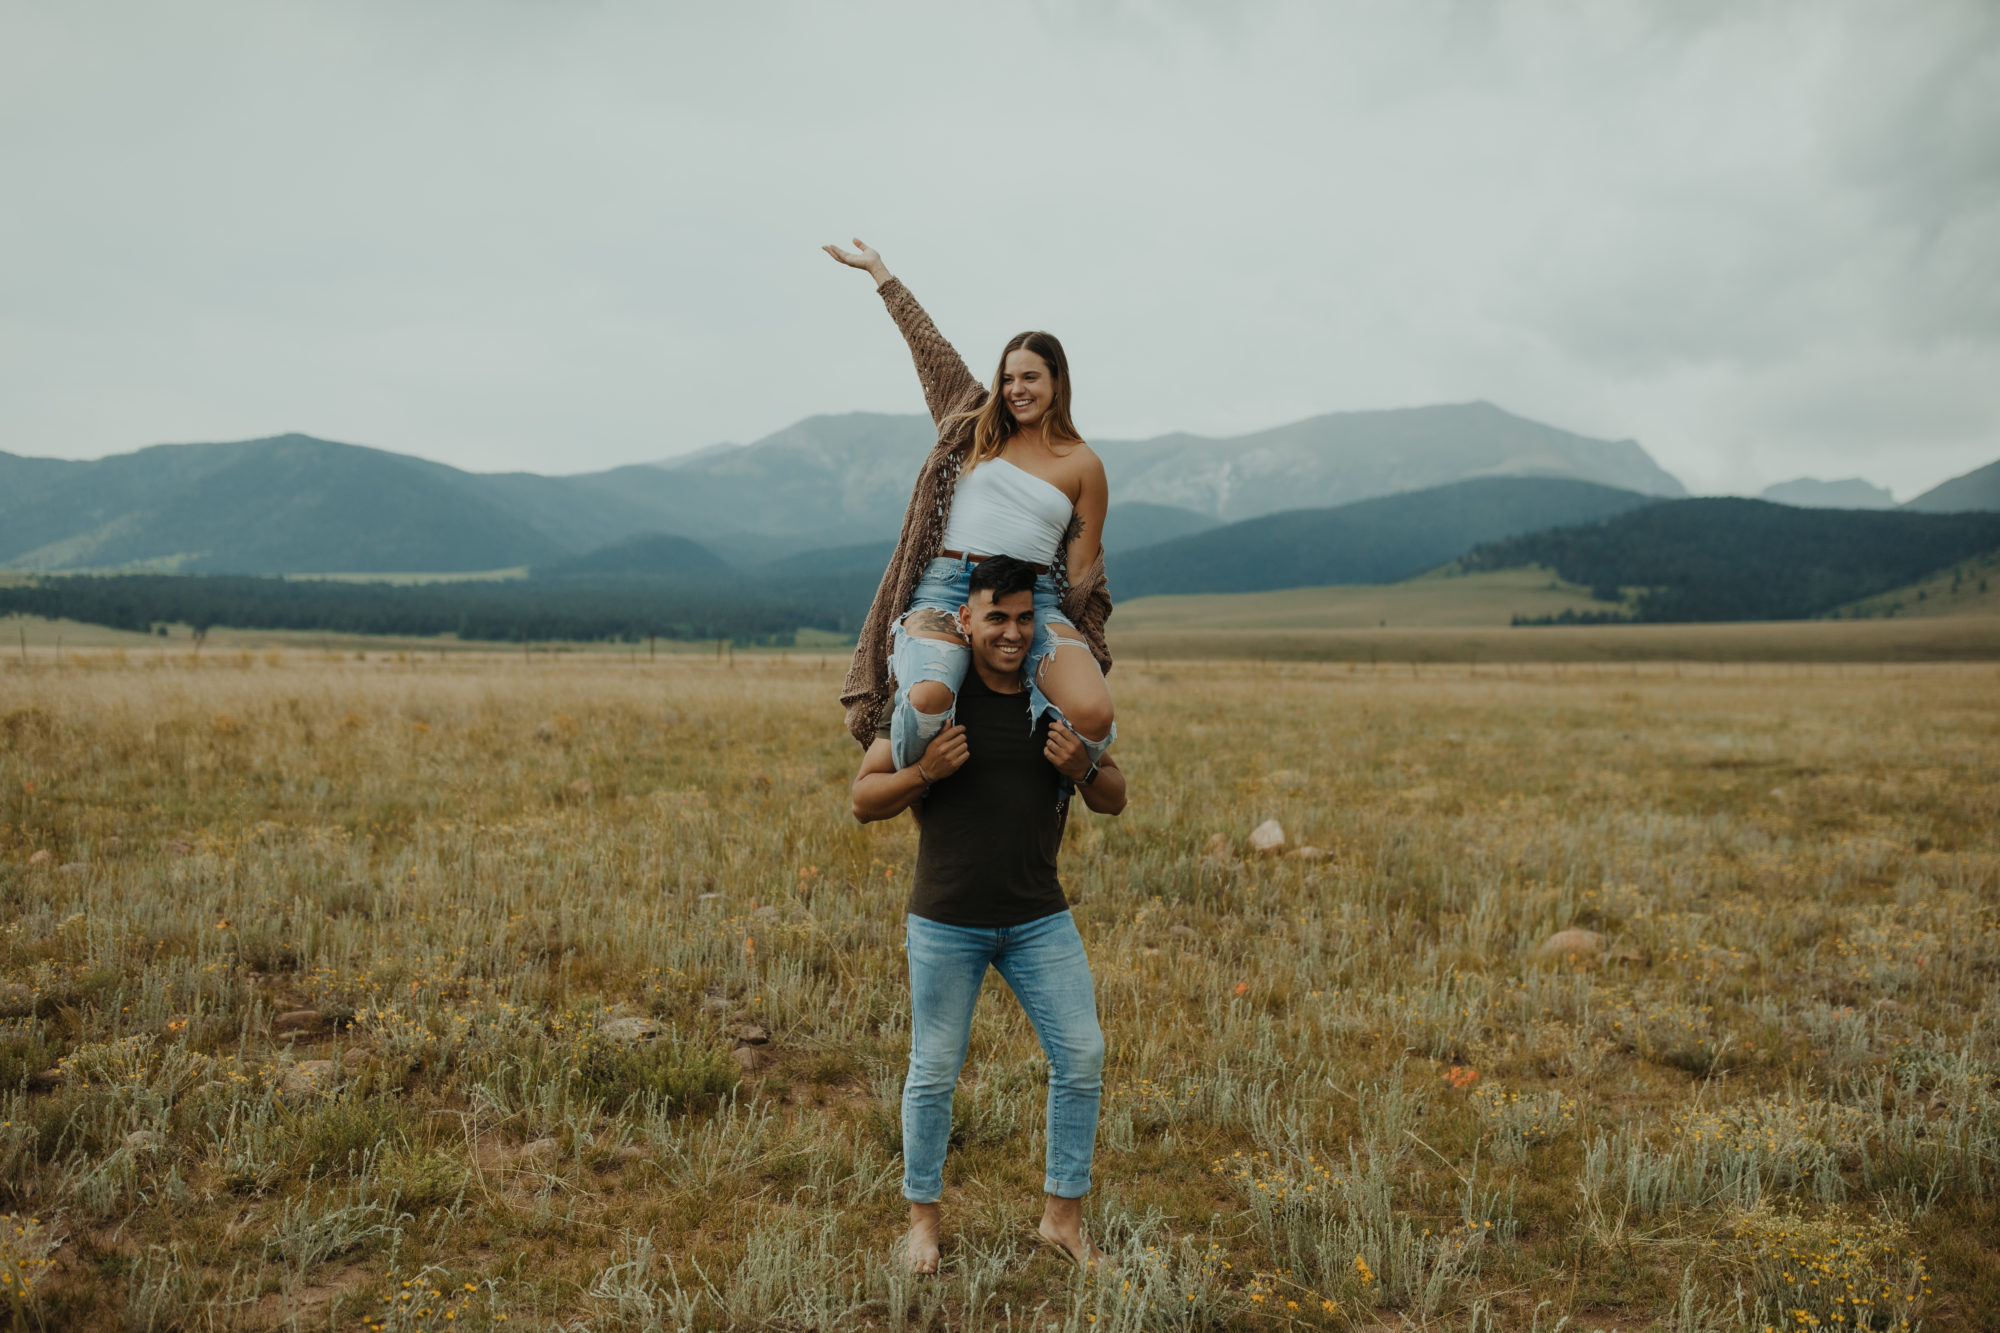 boyfriend giving his girlfriend a shoulder ride in a field in the mountains